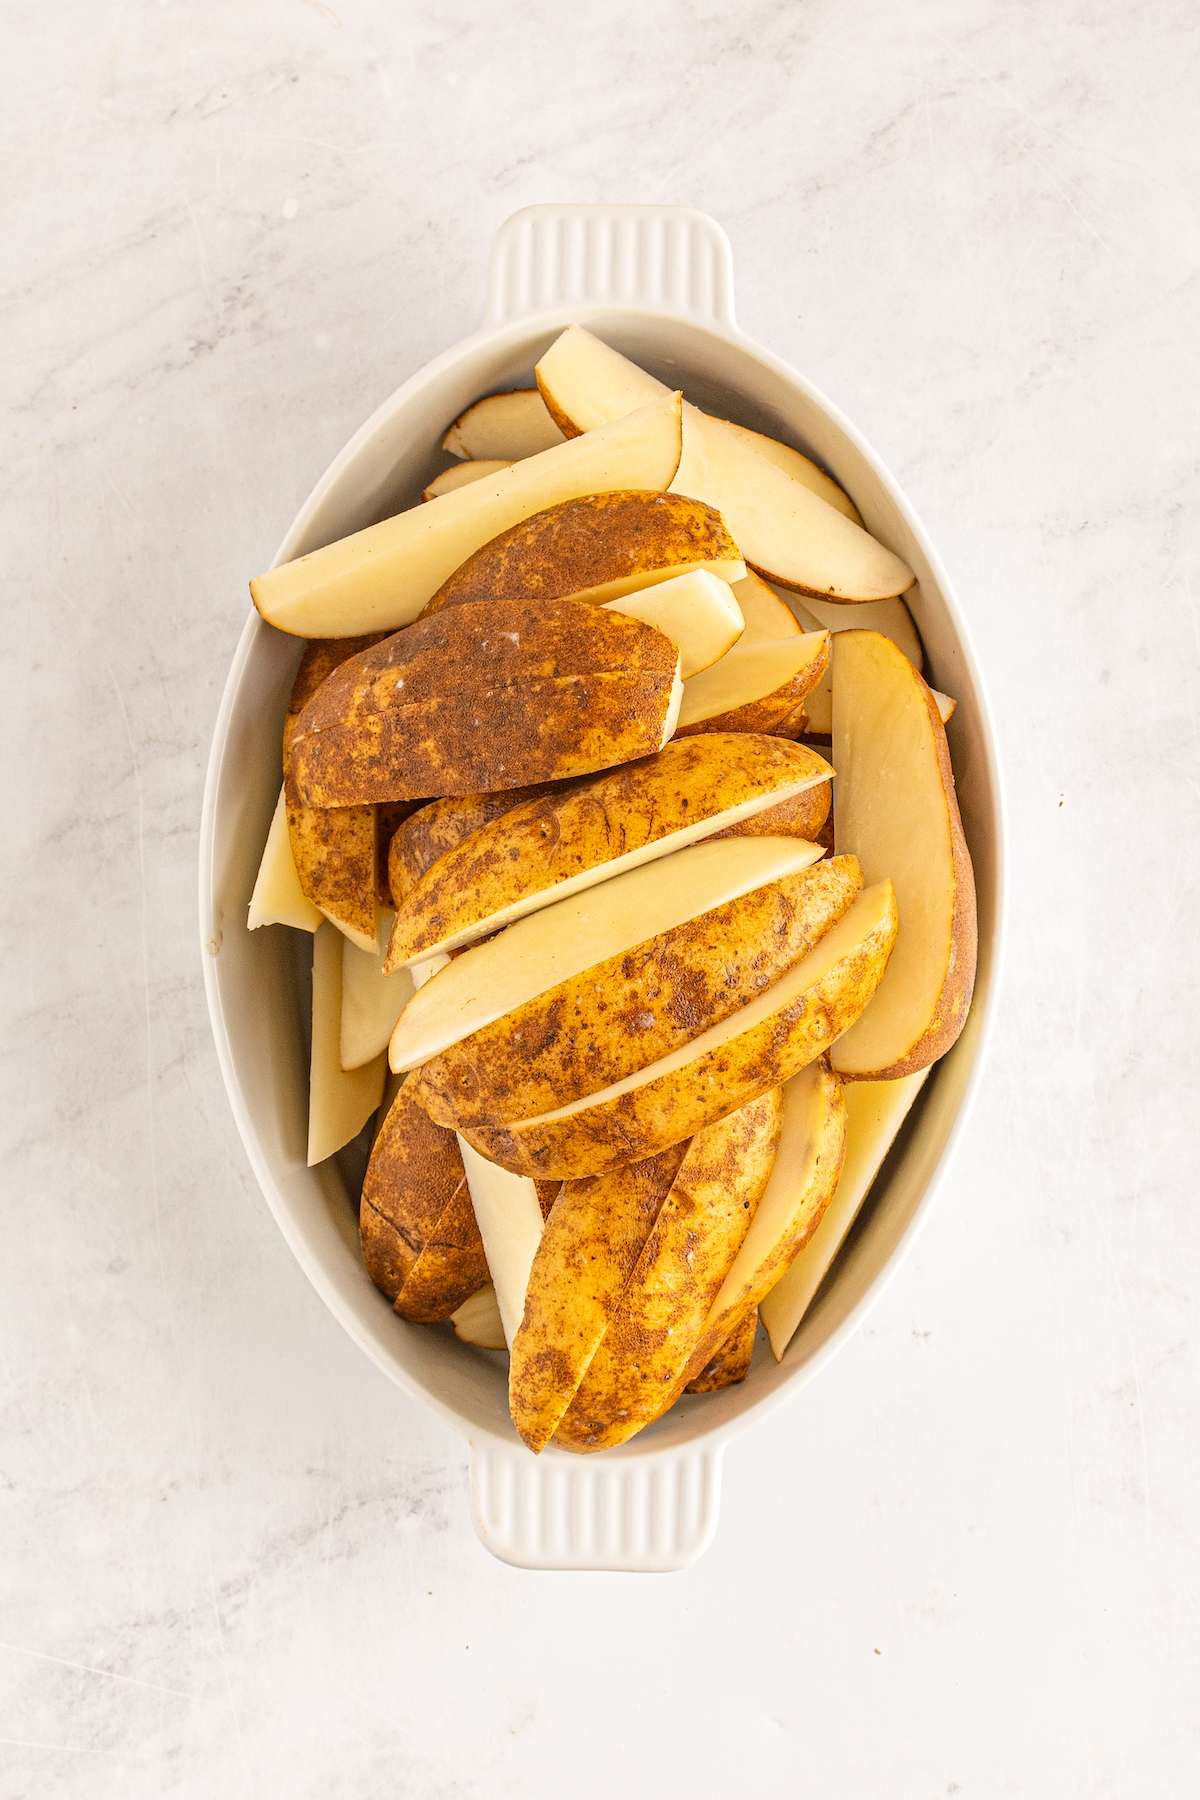 An oval-shaped dish of raw potato wedges.